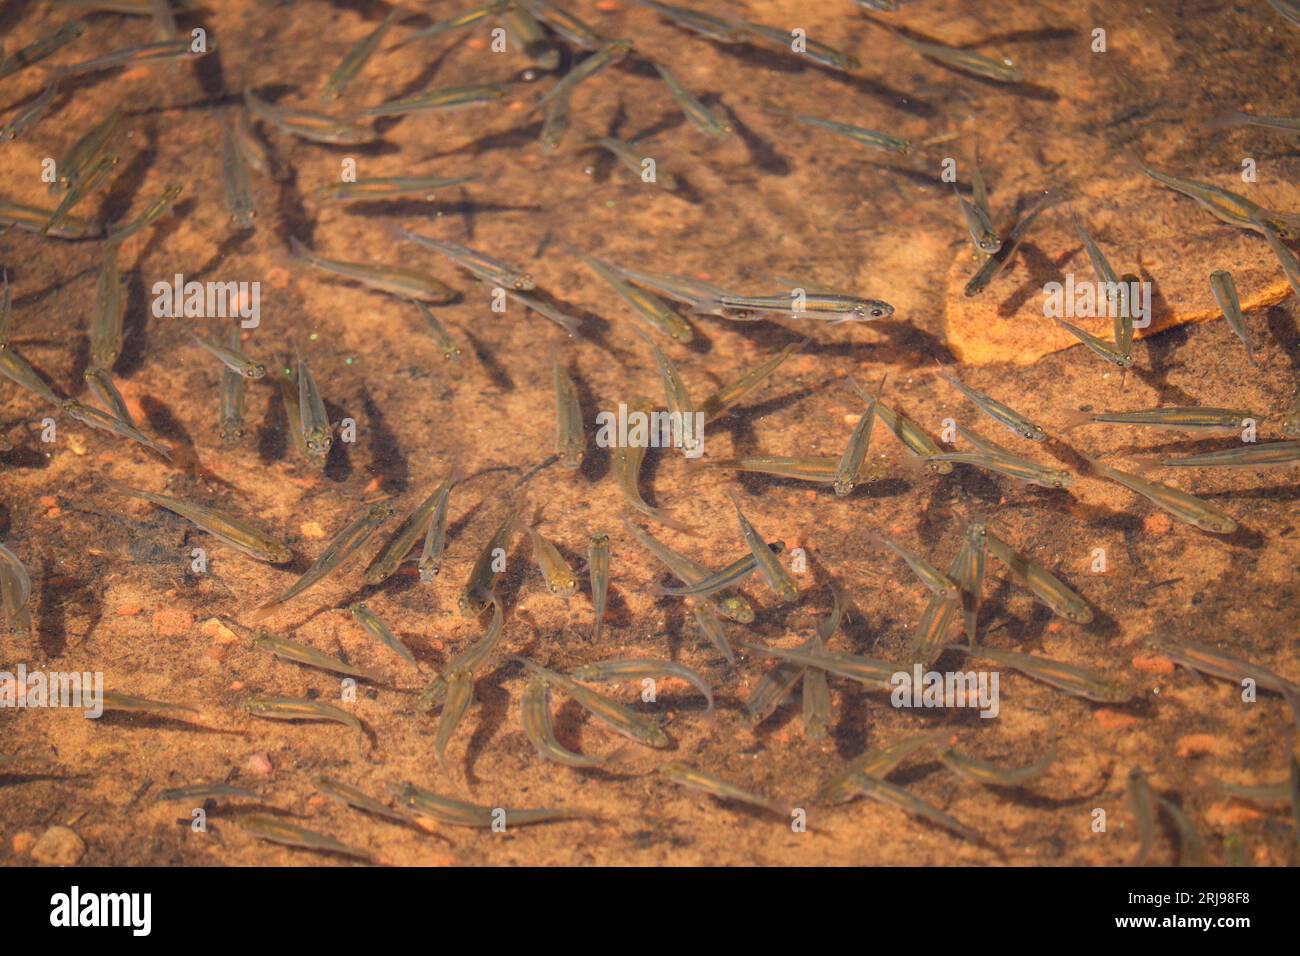 A school of long-finned dace or Agosia chrysogaster at Woods Canyon Lake near Payson, Arizona. Stock Photo